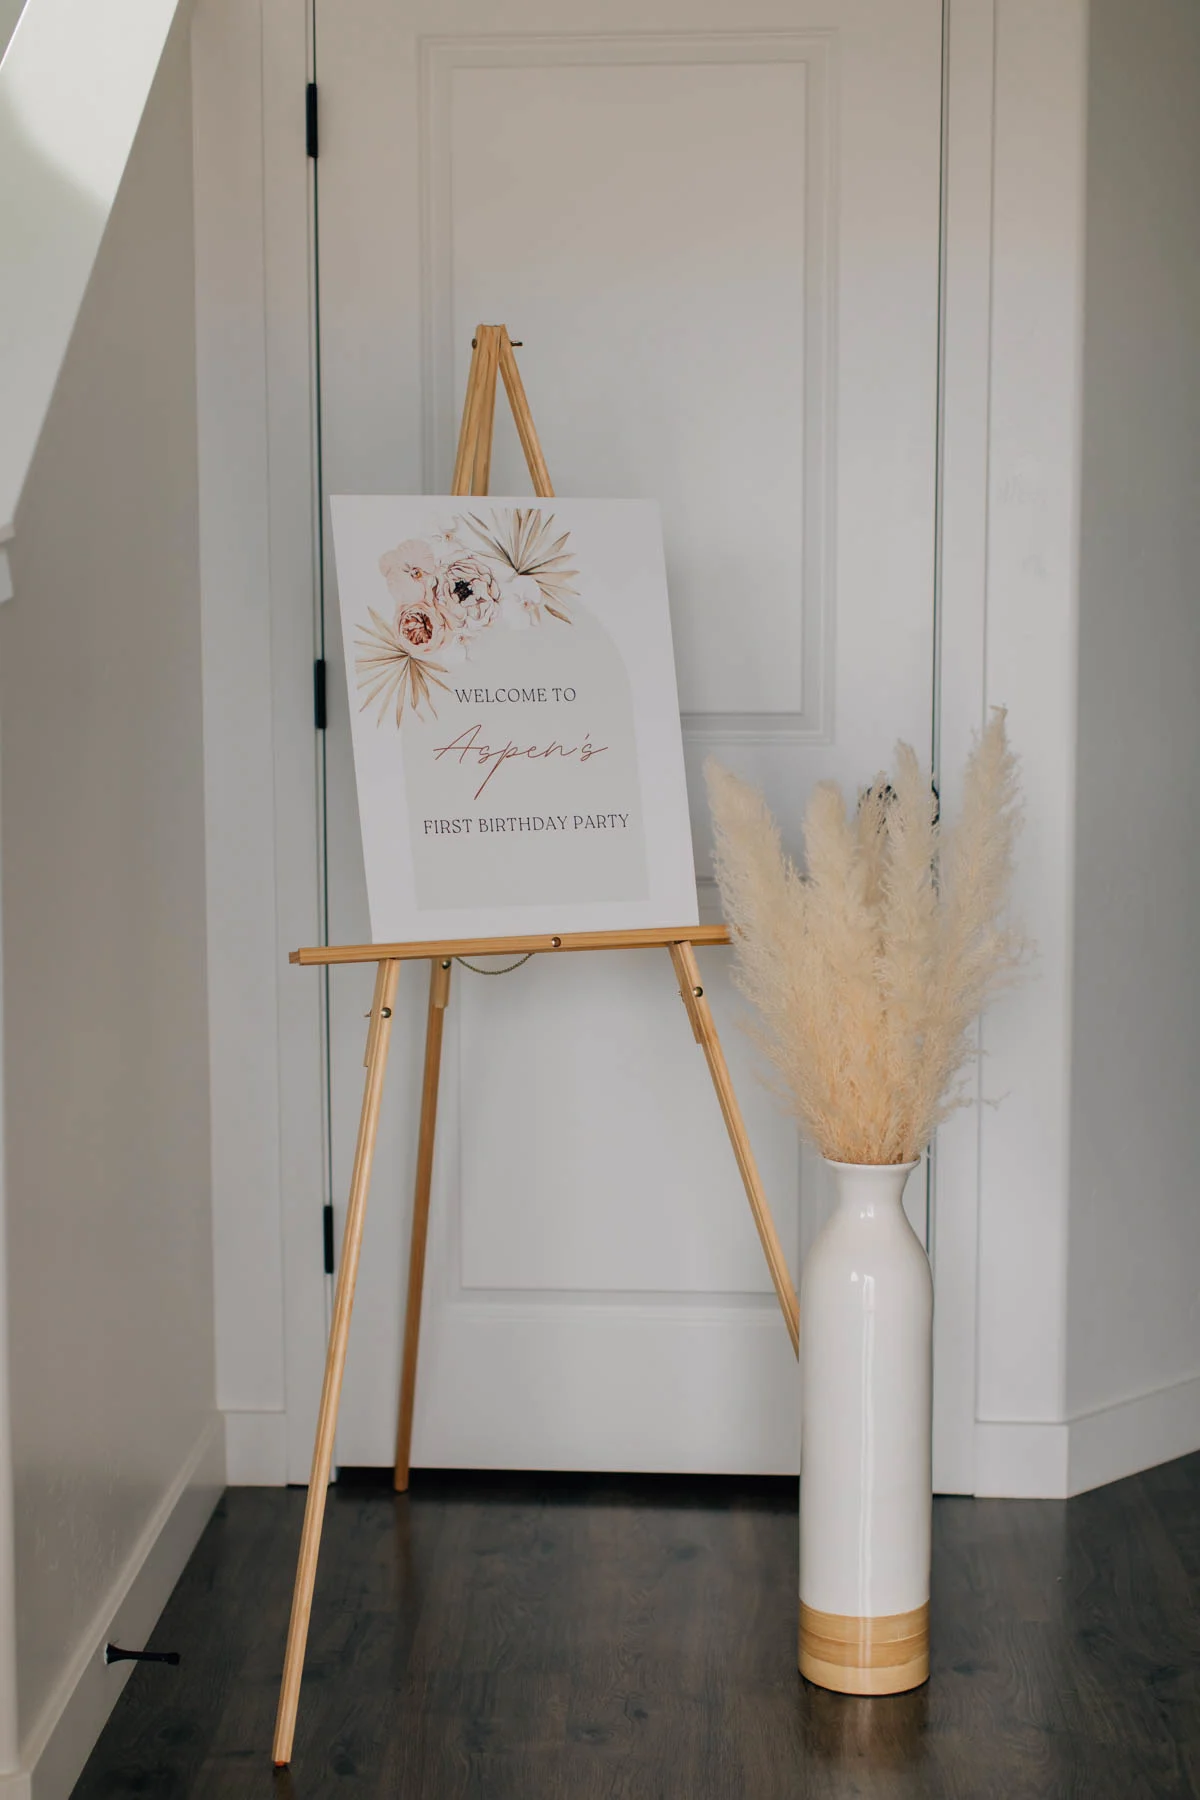 Party sign on wood easel next to floor vase with pampas grass.